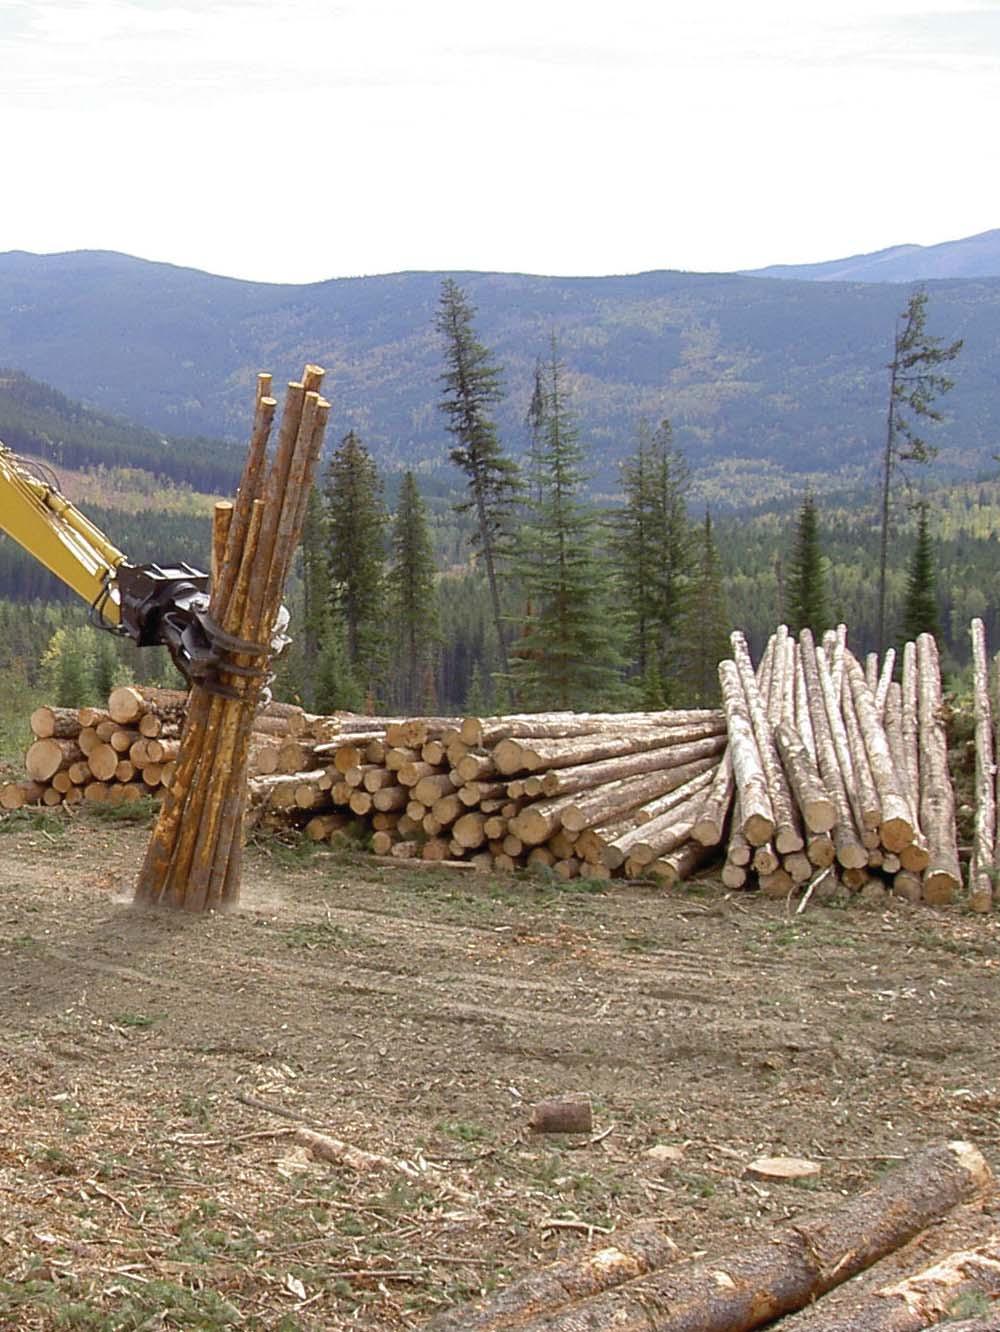 360 continuous rotation with dual drive high torque motors for excellent load handling May be used on log loader booms with optional tilt